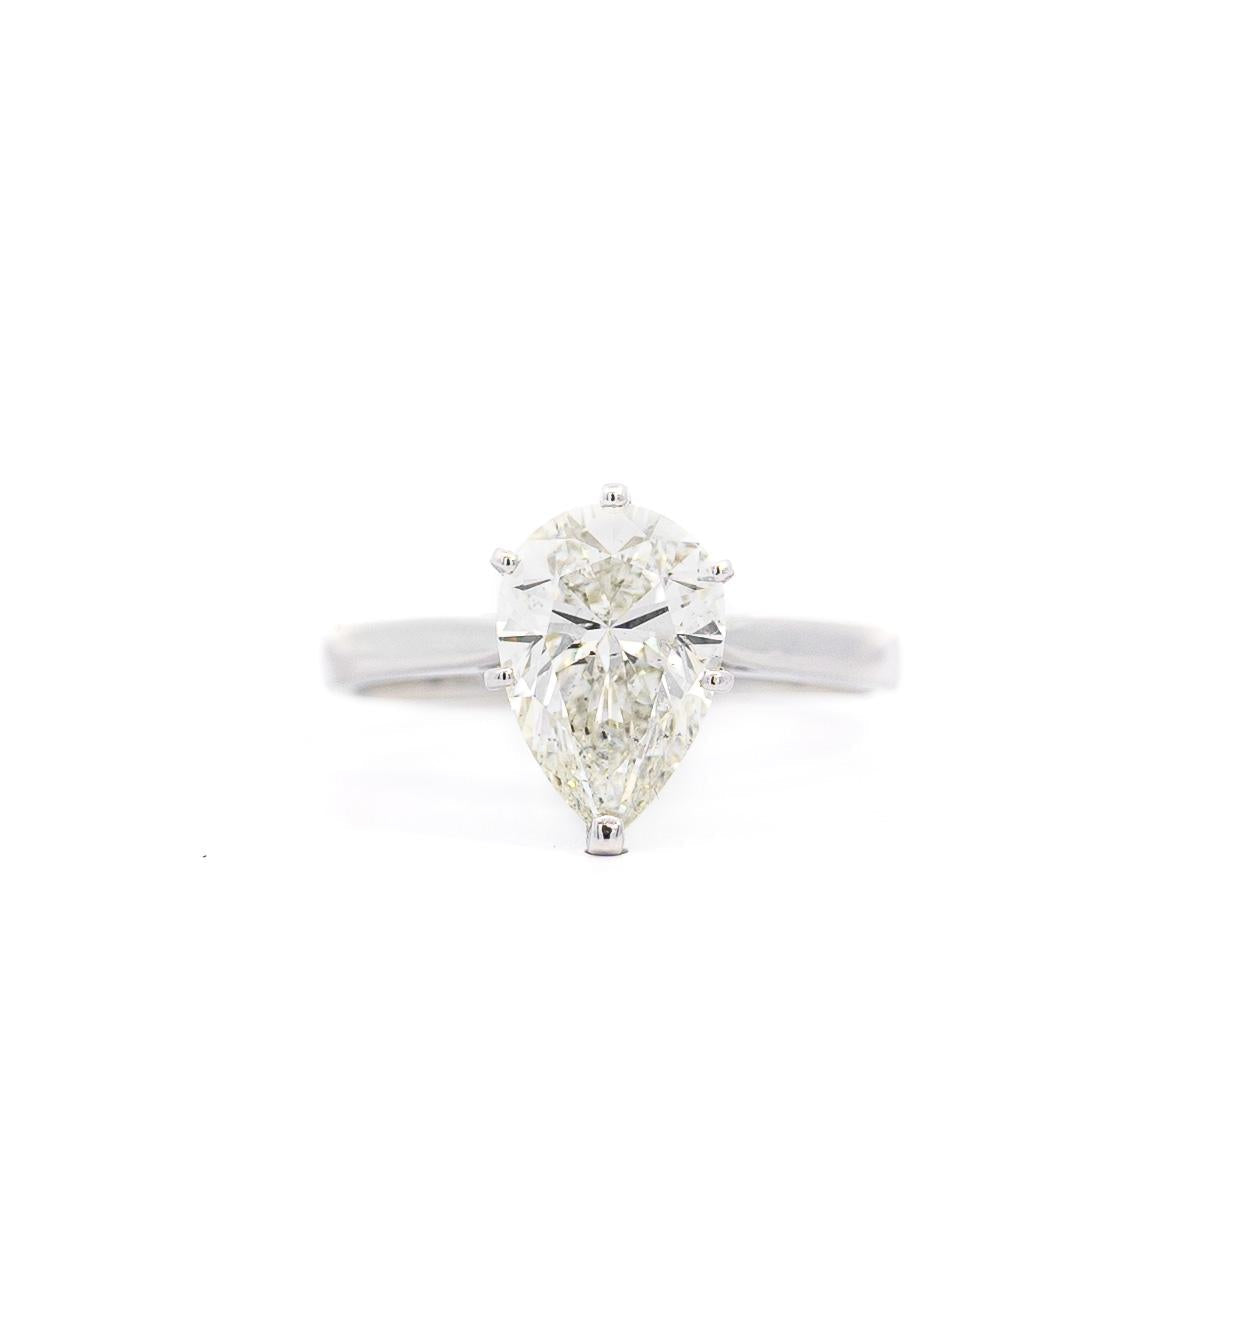 SI2 Pear Cut Diamond Solitaire 18K White Gold Ring